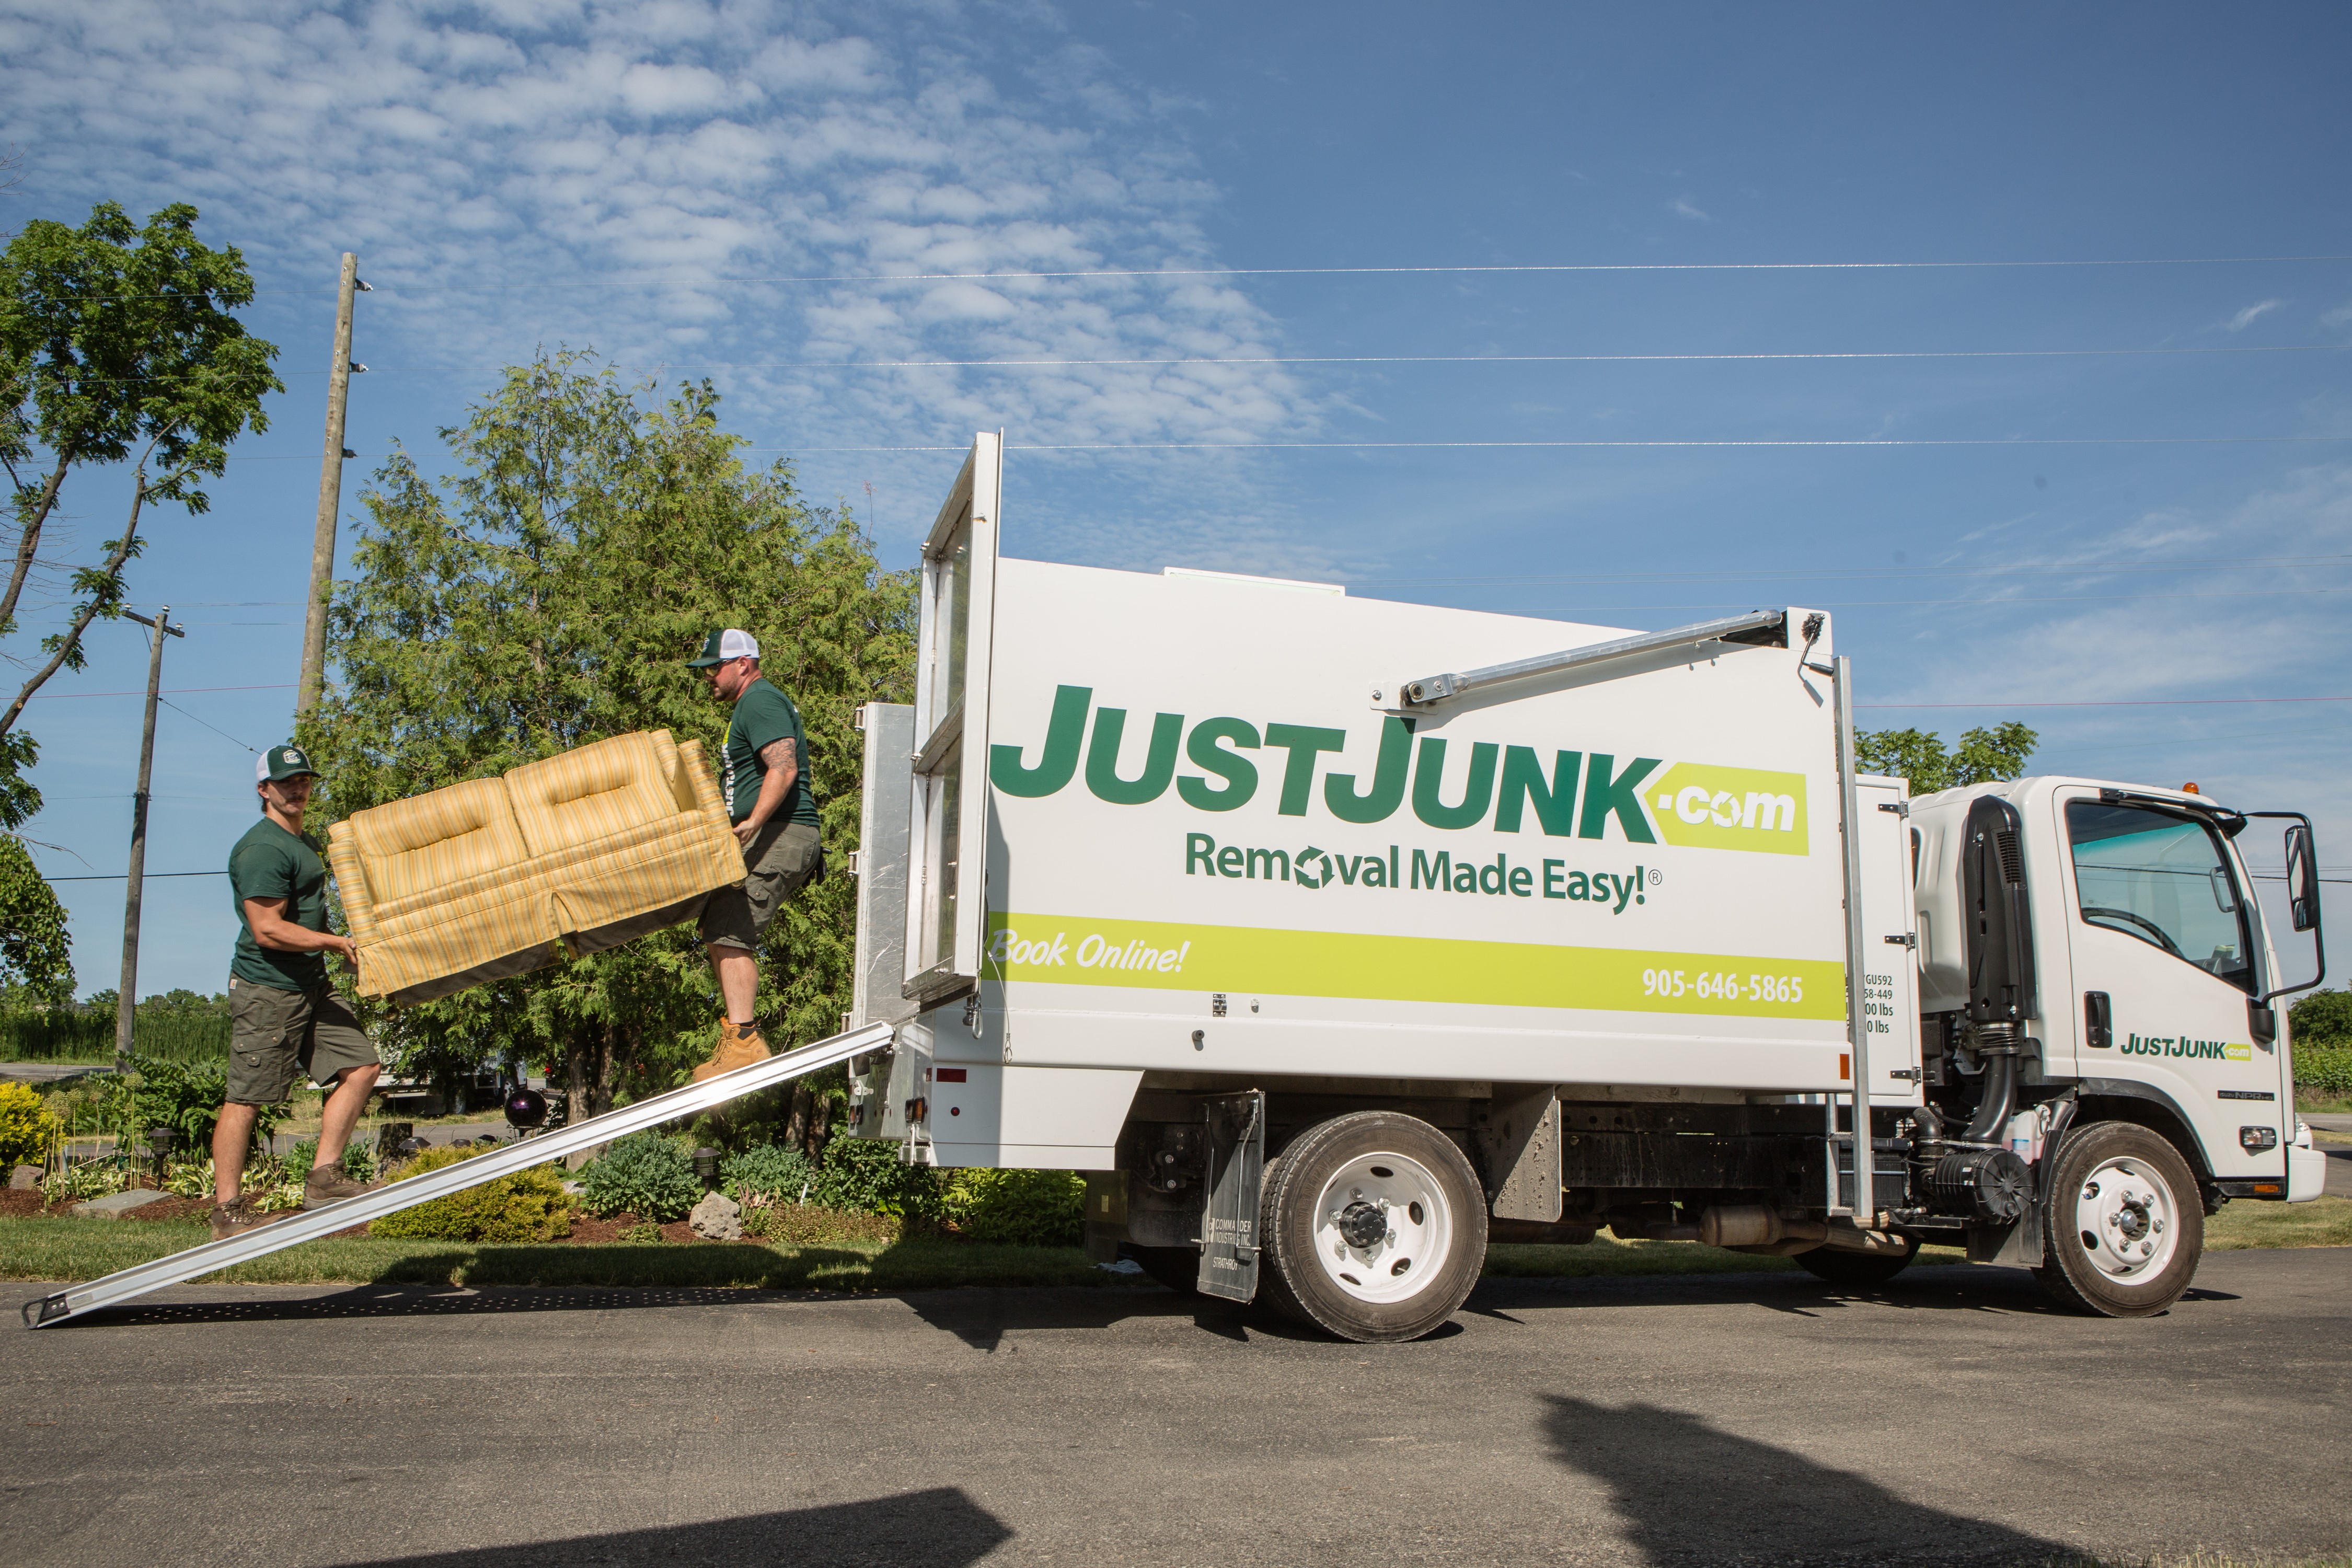 Just Junk Service - Junk Removal and Downsizing in Toronto